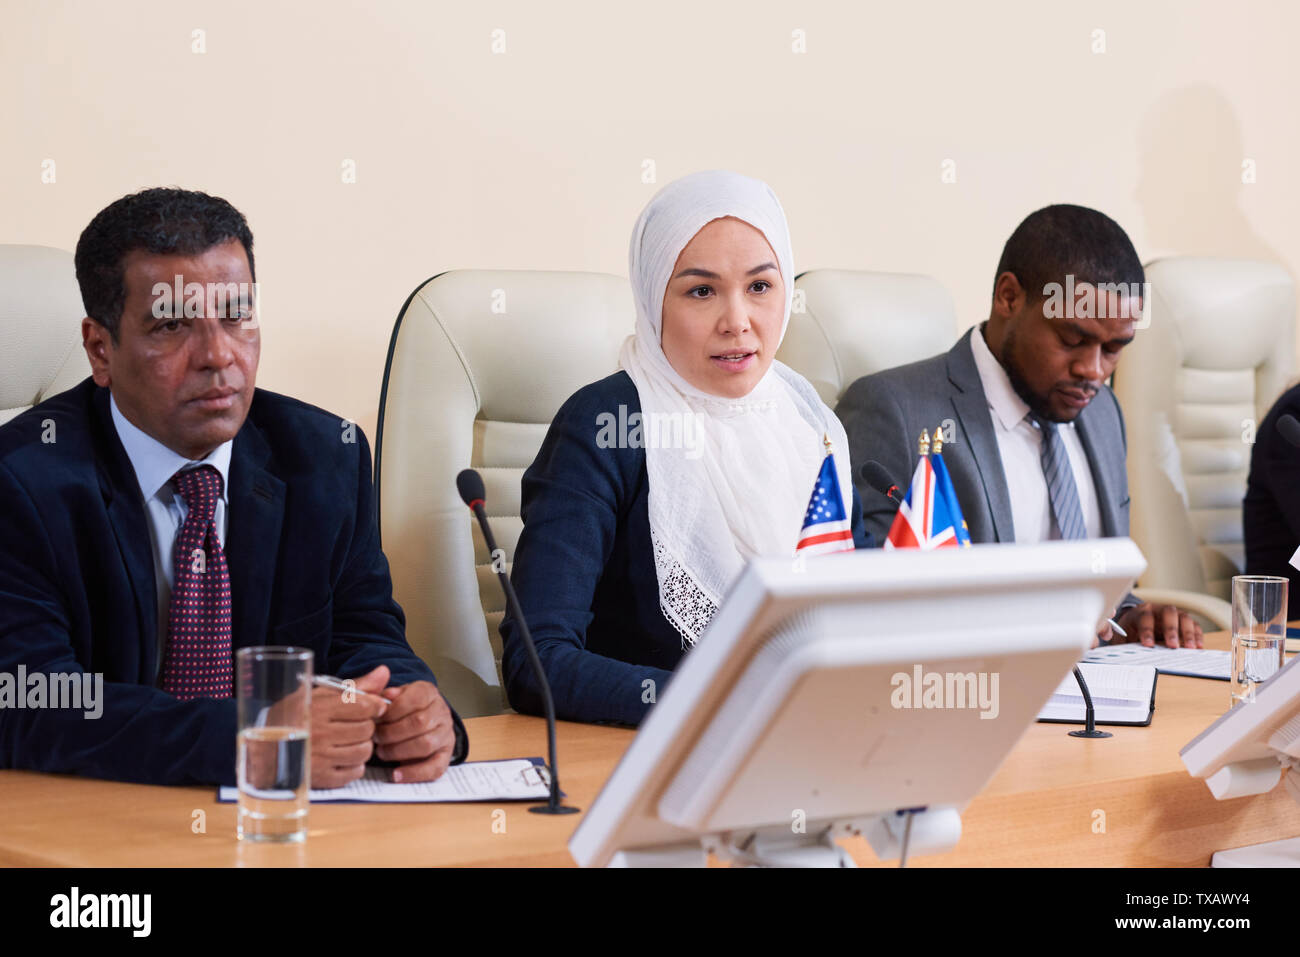 Intercultural group of young delegates or business people Stock Photo